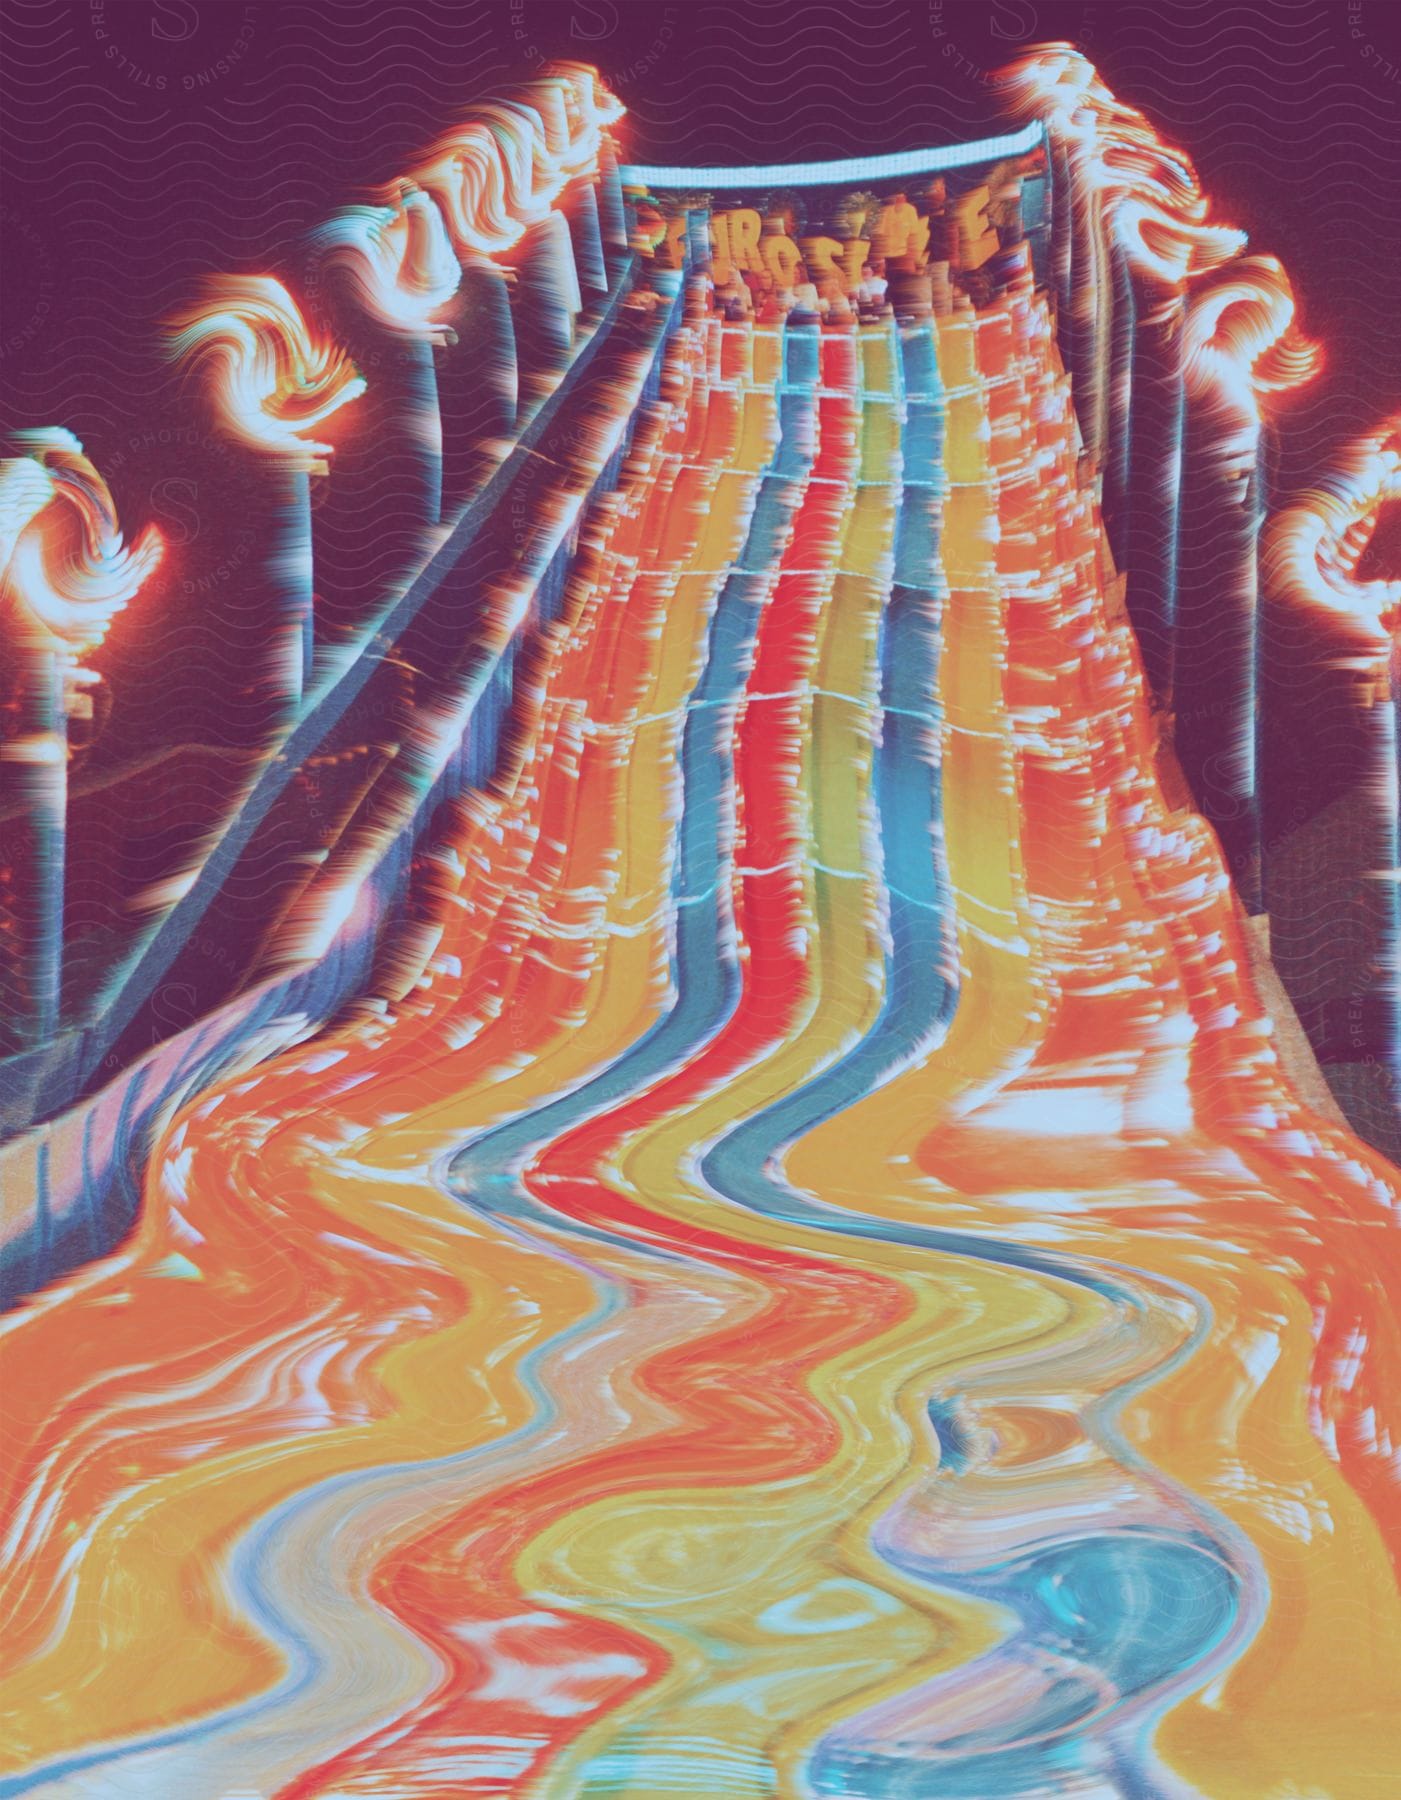 People waiting at the top of a tall slide in an outdoor setting at night time